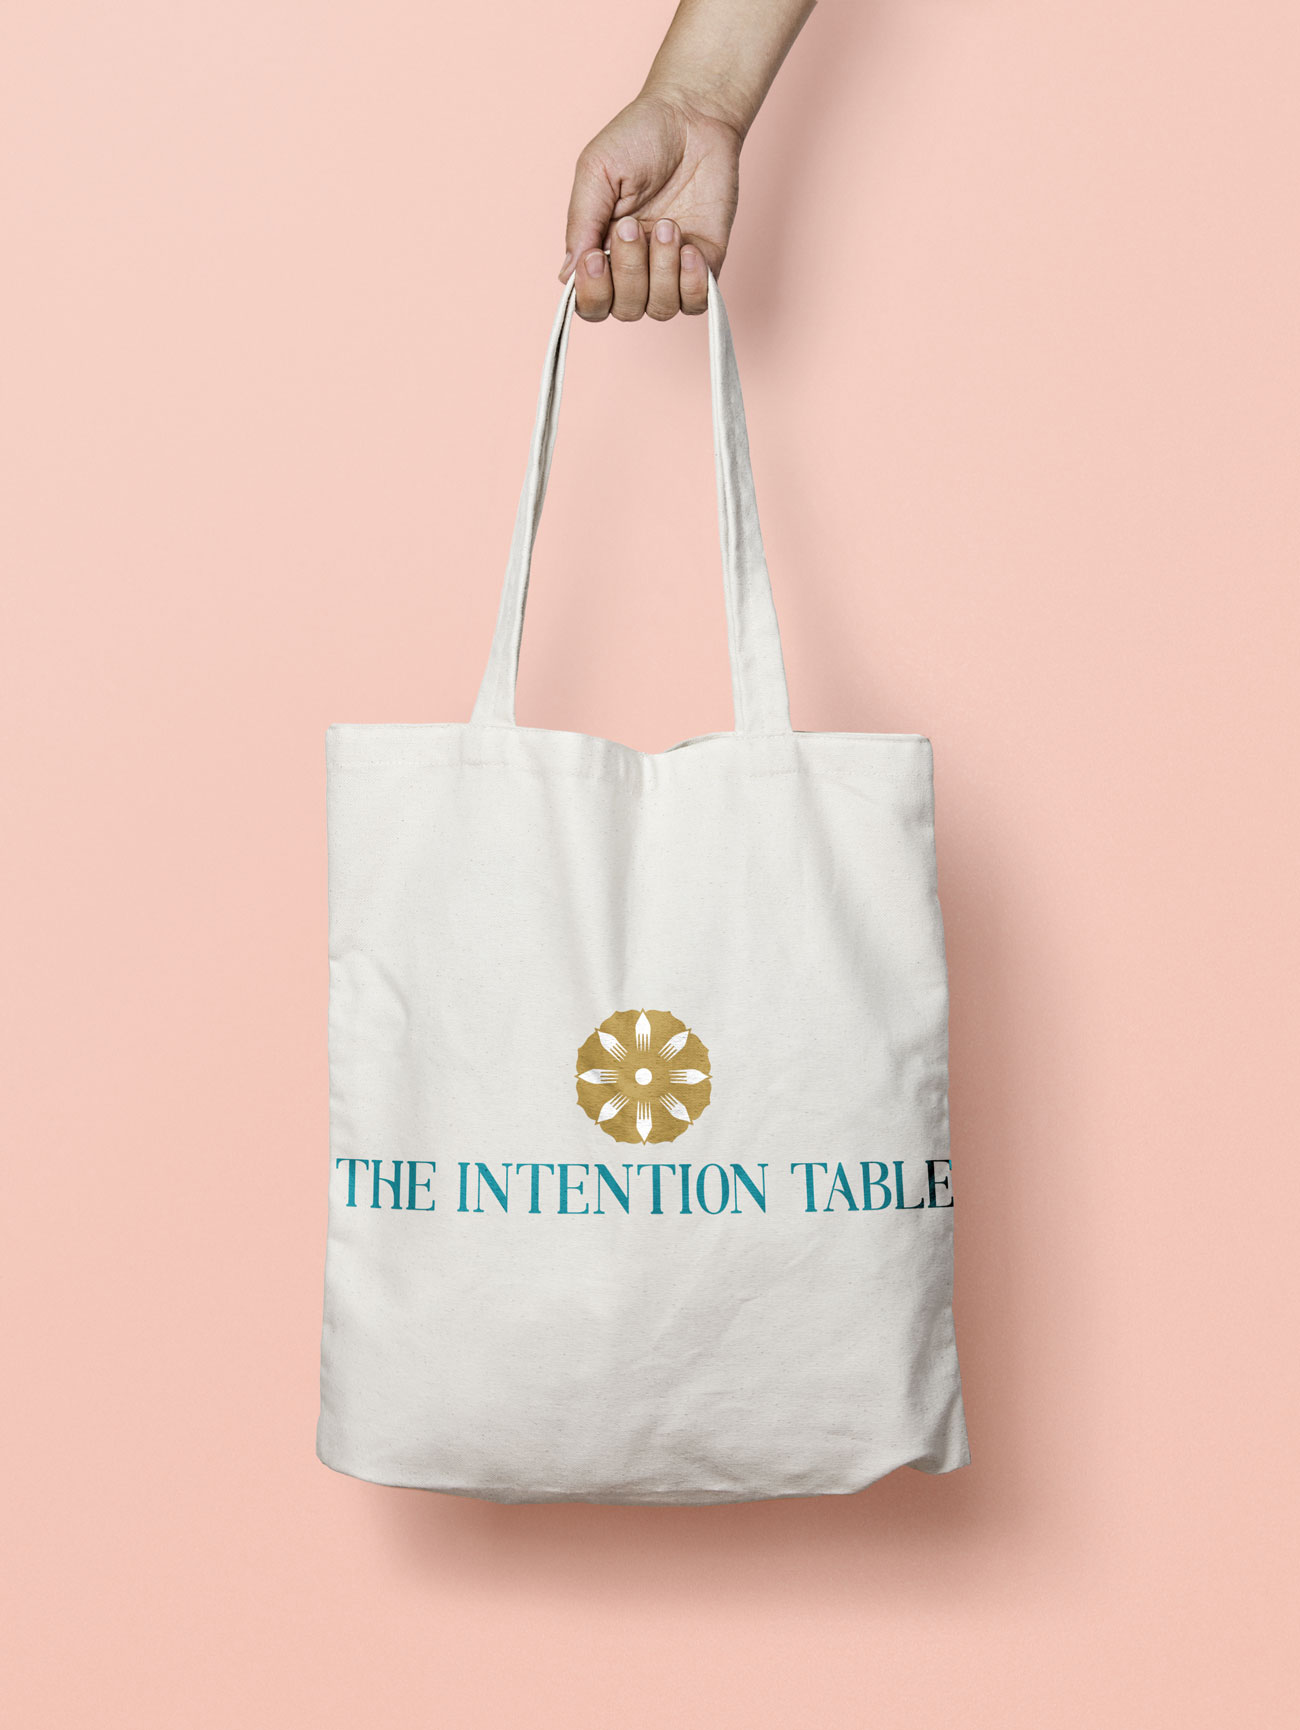 Brand refresh by J. Alexandria Creative | The Intention Table tote bag logo mockup